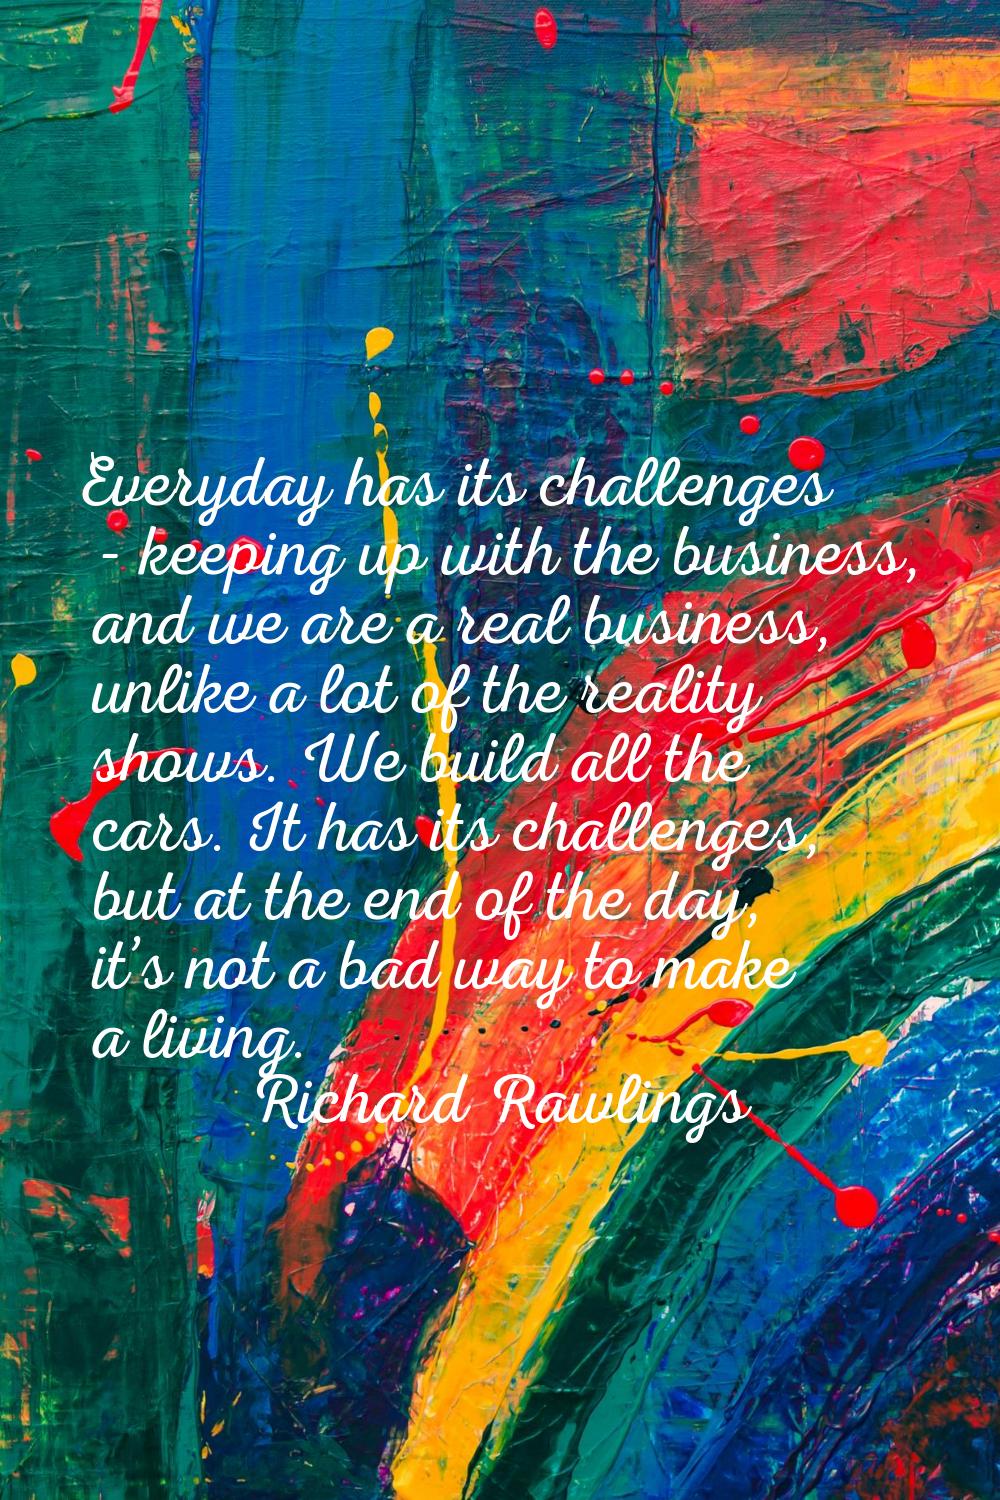 Everyday has its challenges - keeping up with the business, and we are a real business, unlike a lo